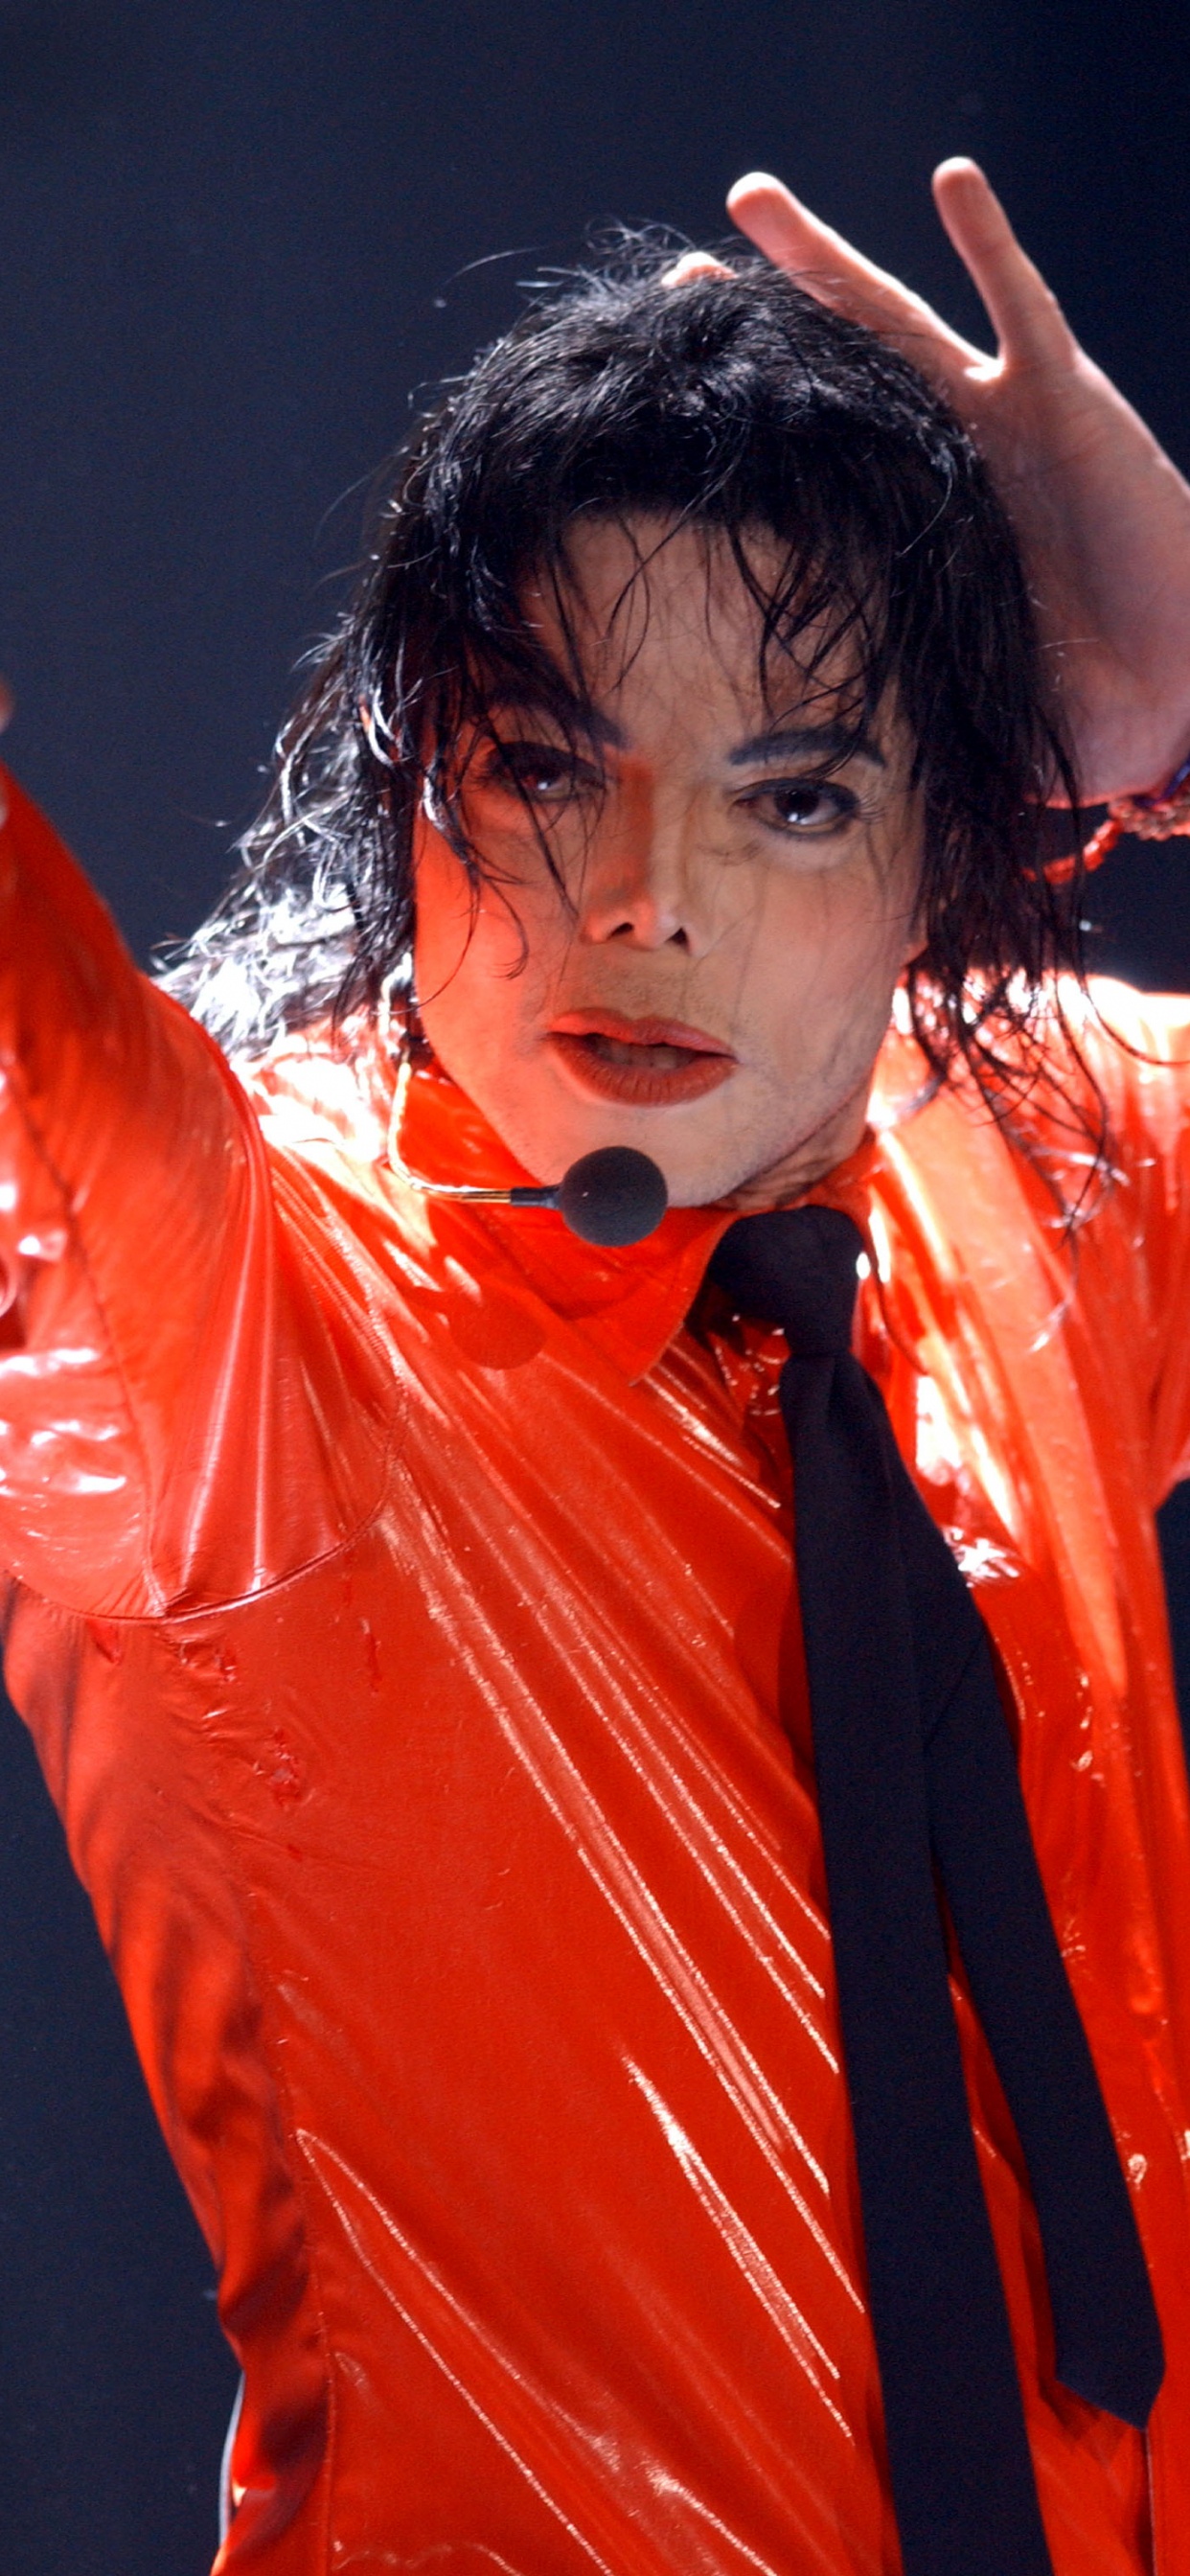 Michael Jackson, Performance, Red, Performing Arts, Singer. Wallpaper in 1242x2688 Resolution